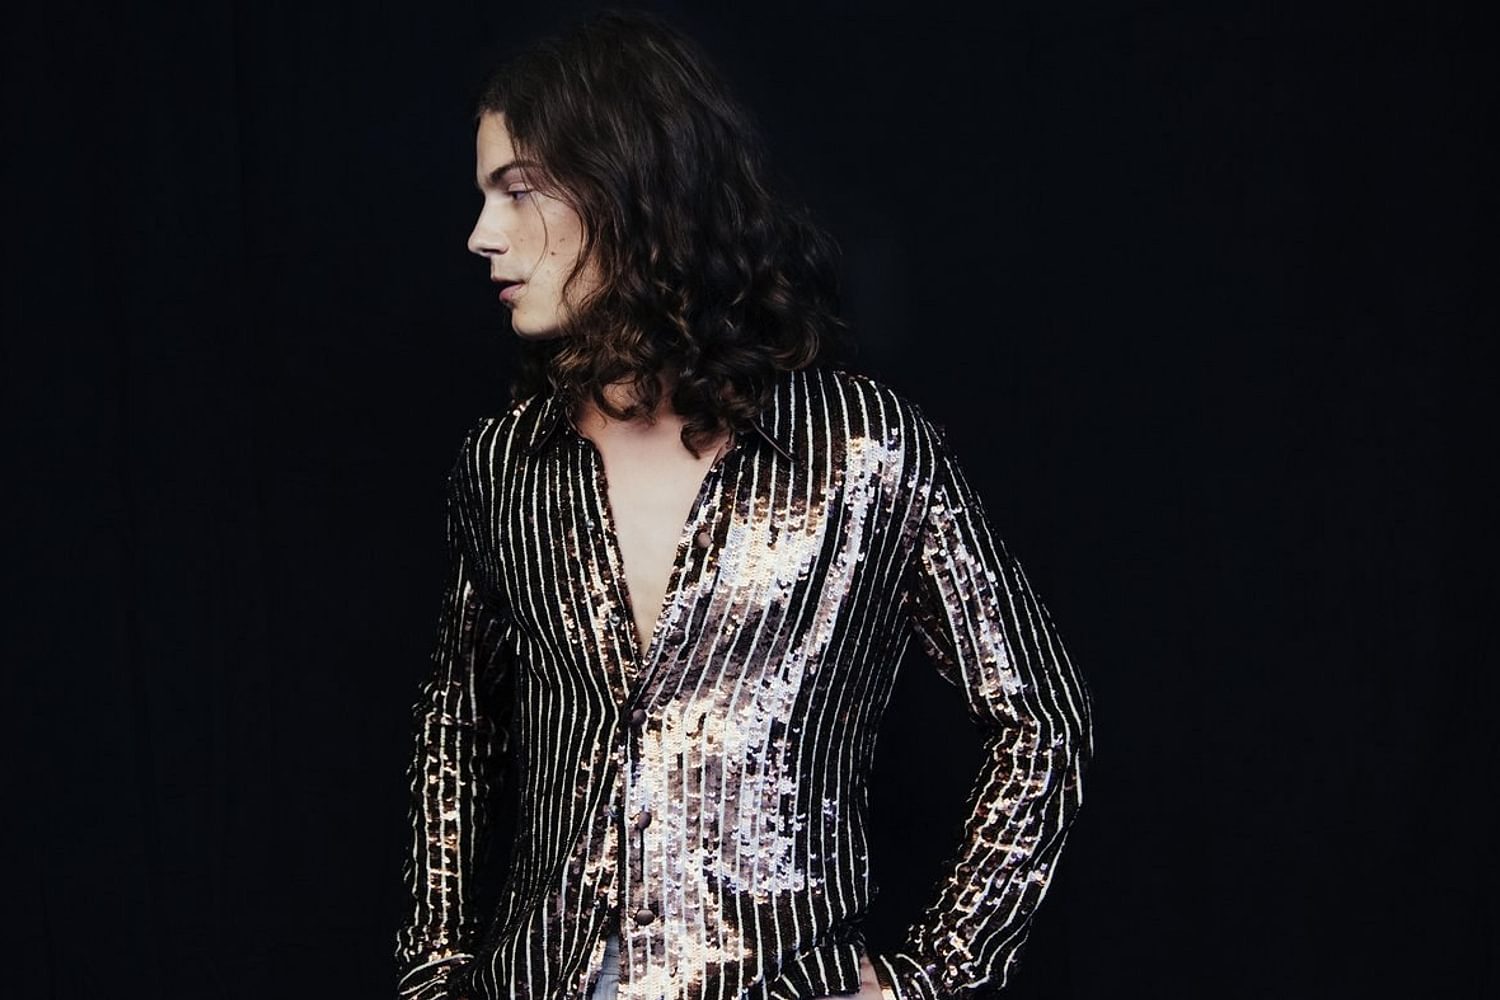 BØRNS: "There's a lot of room for being a pop star and still letting yourself get weird"